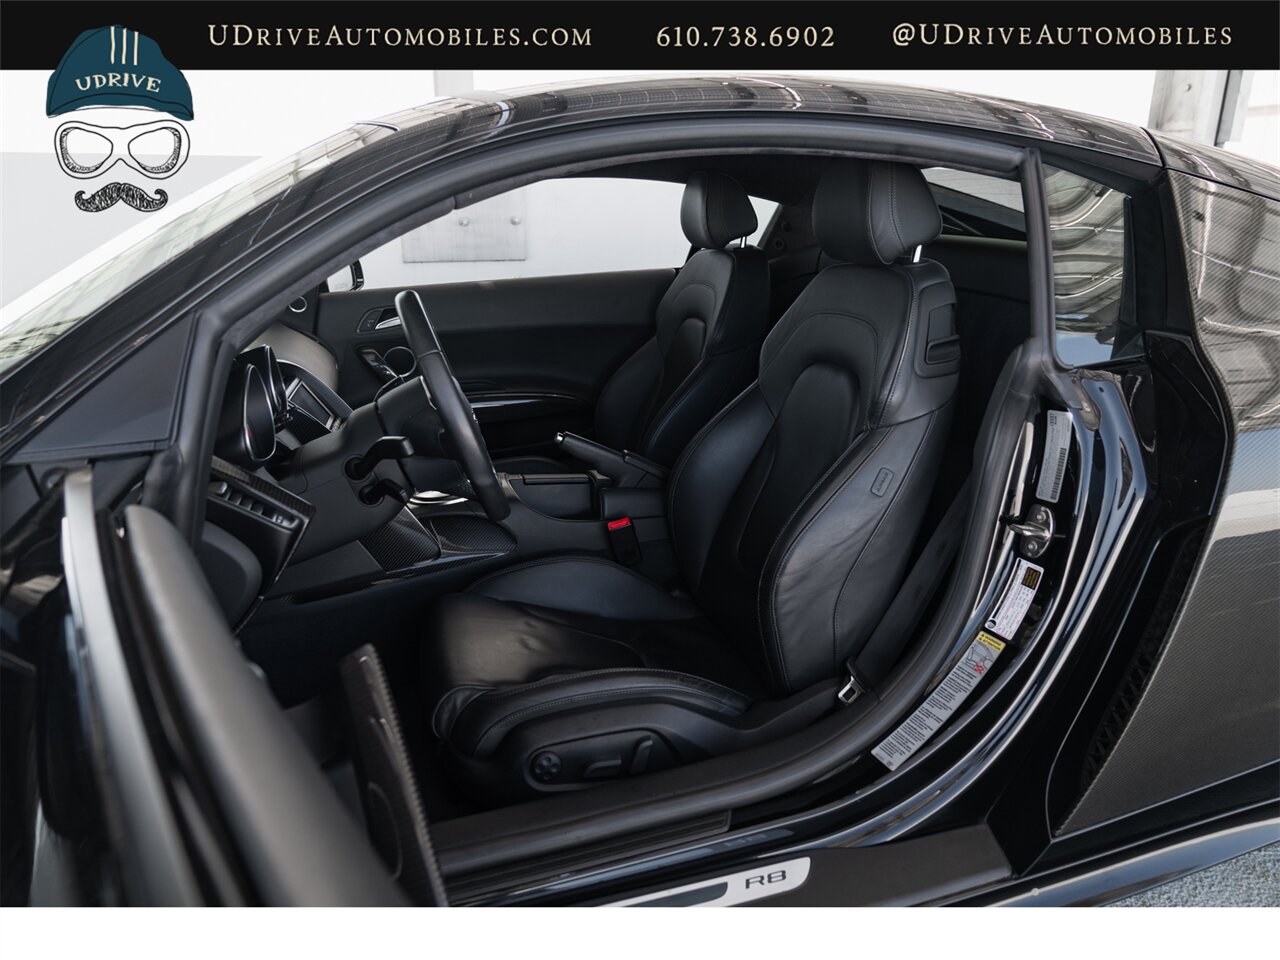 2009 Audi R8 Quattro  4.2L V8 6 Speed Manual - Photo 6 - West Chester, PA 19382